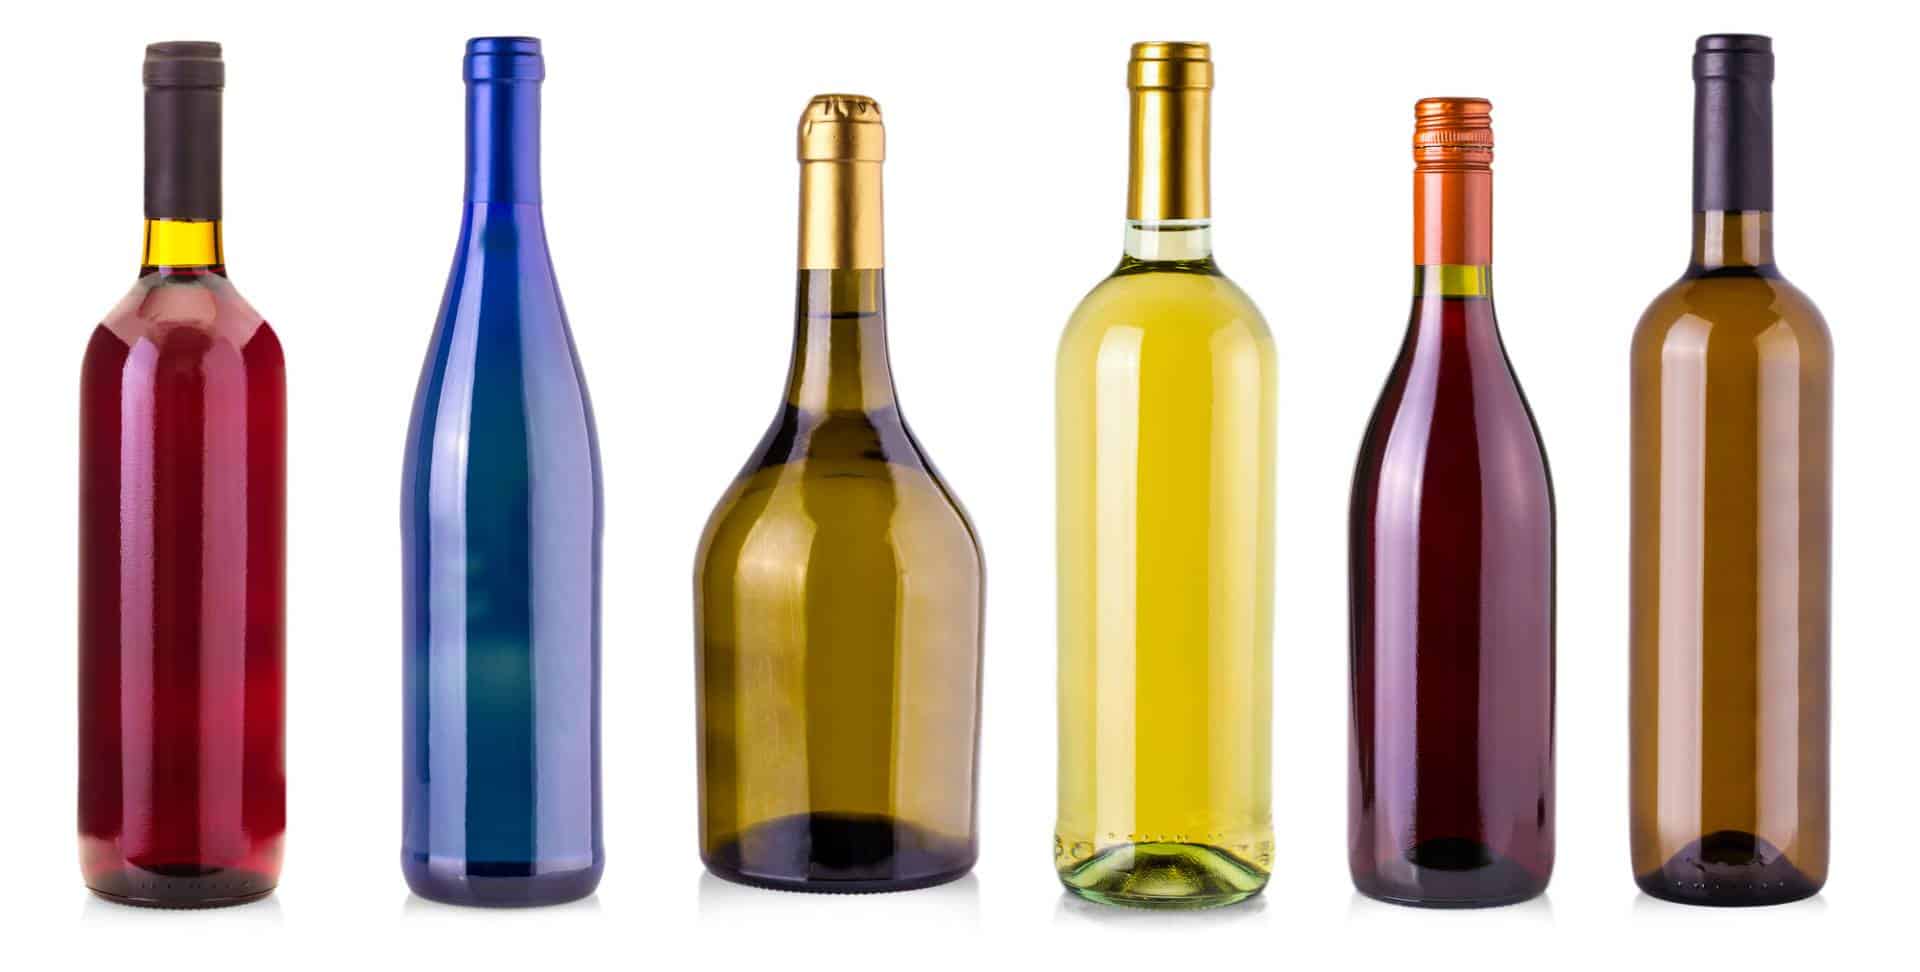 What are the various types of wine bottles called?